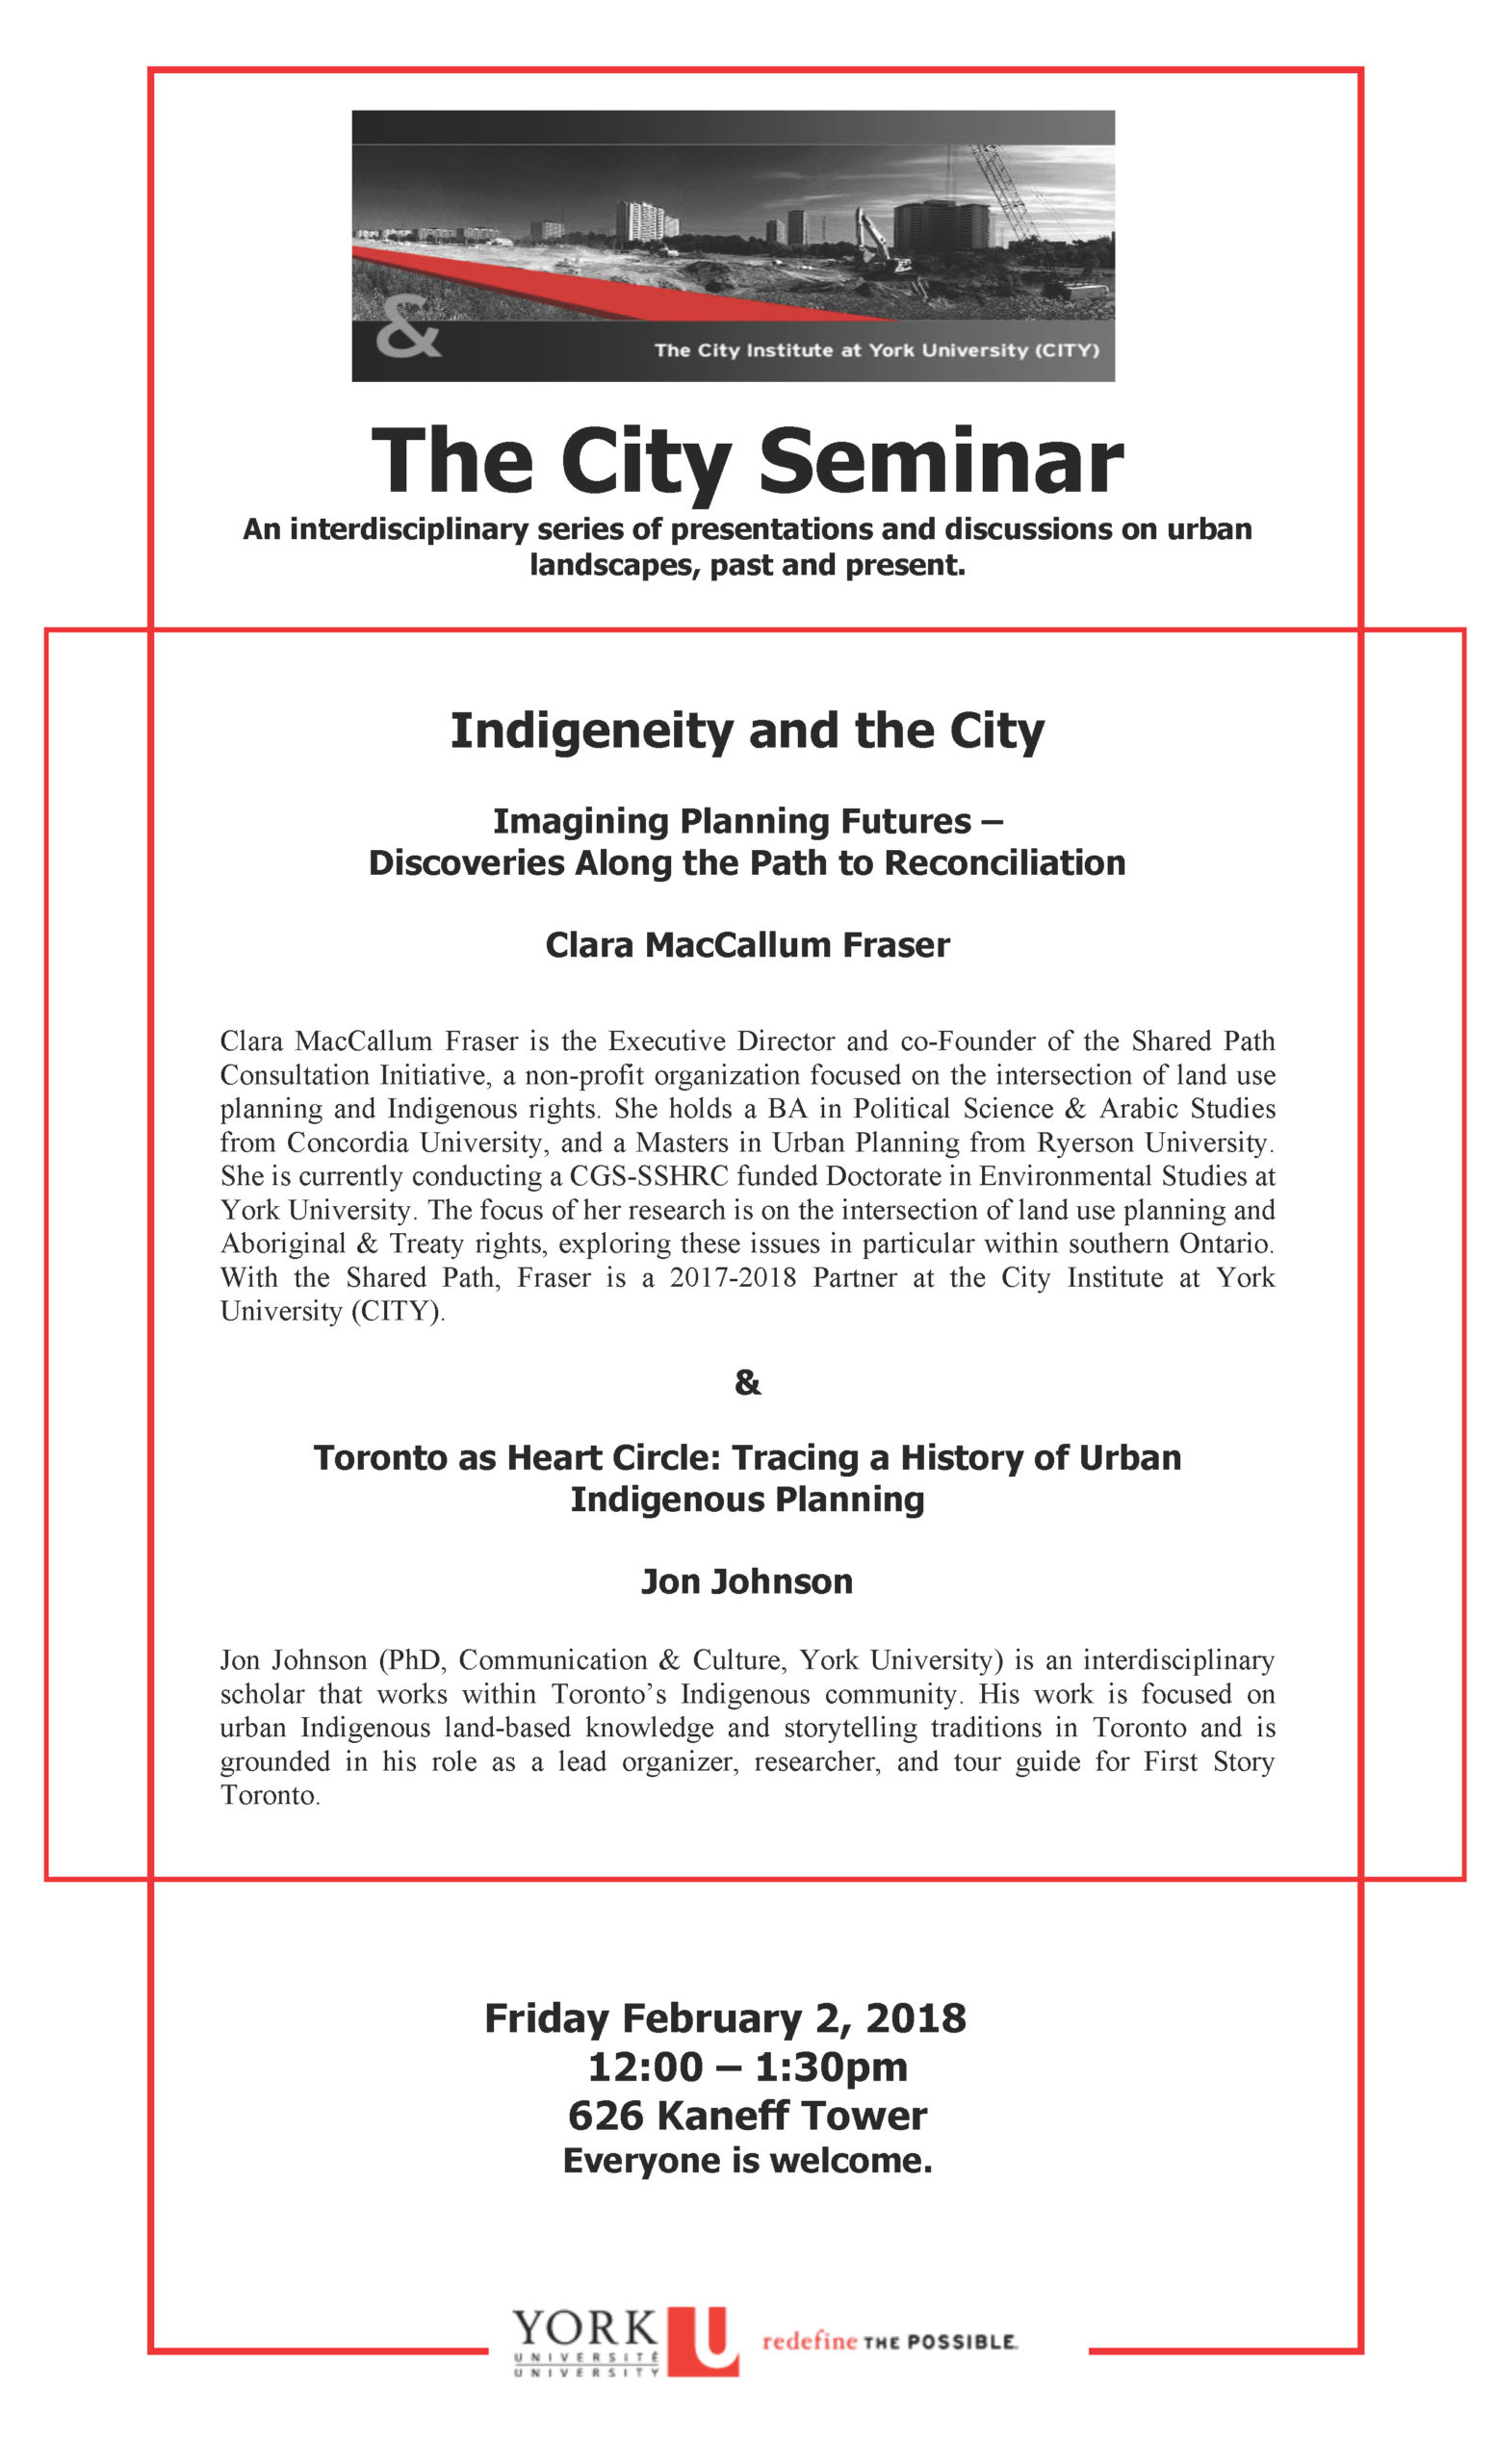 Indigeneity and the City, with two red interlocking borders and event details.